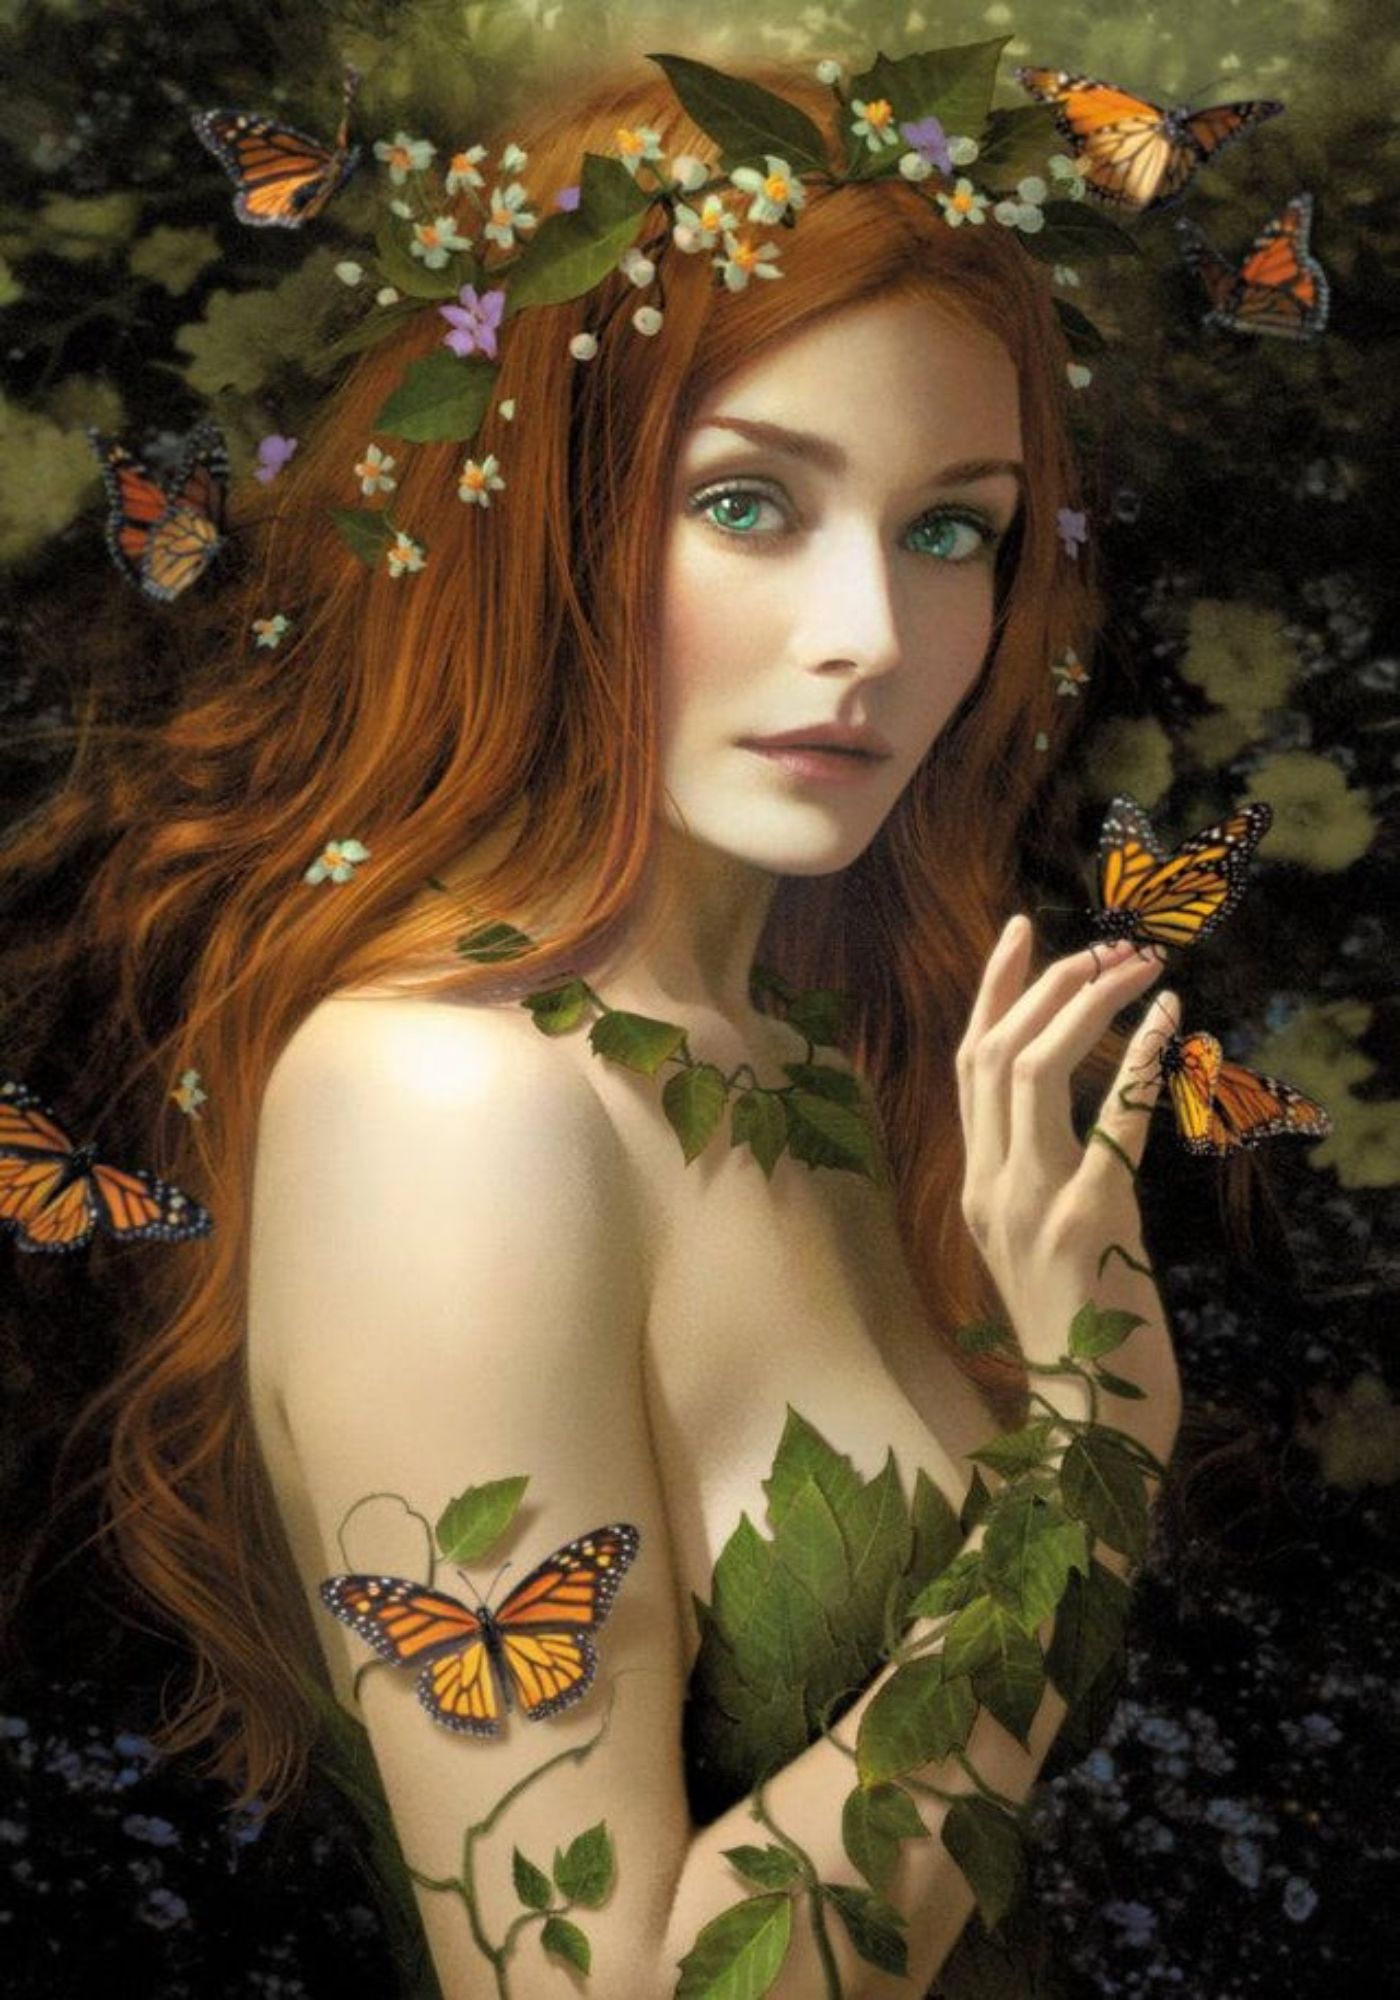 New Poison Ivy Cover Is So Stunning That the DCEU Should Take Notes